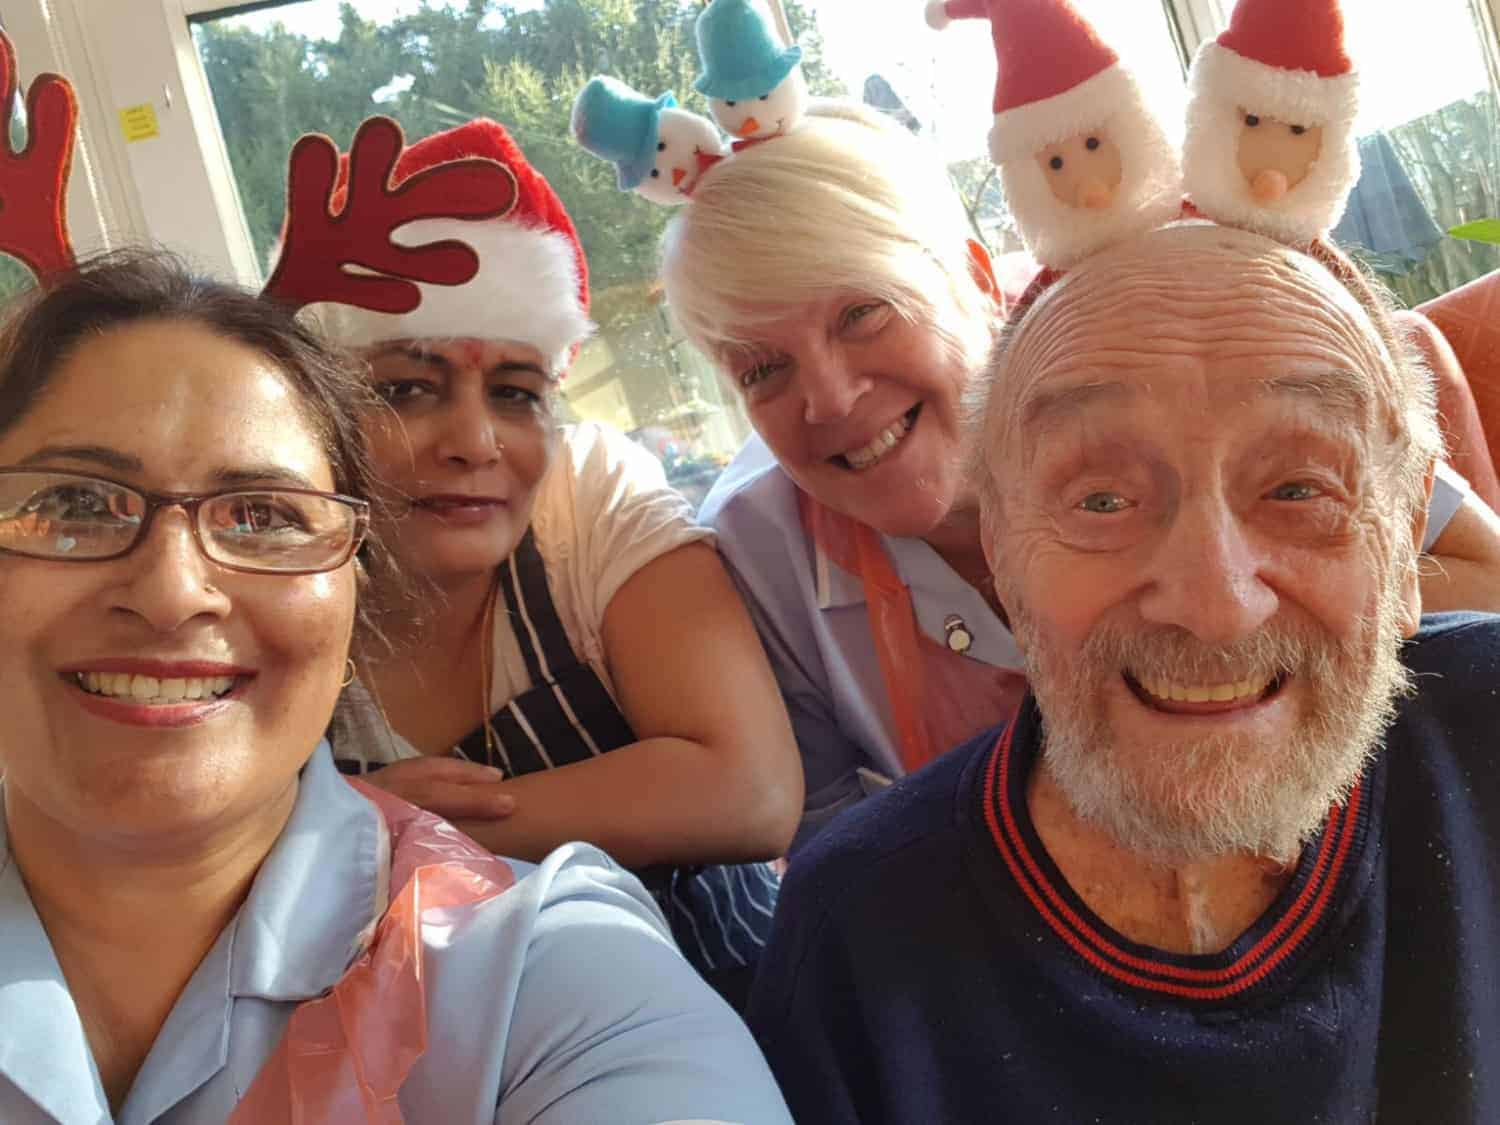 A cheerful group of people wearing festive holiday hats with Santa and reindeer designs, sharing a joyful moment together.